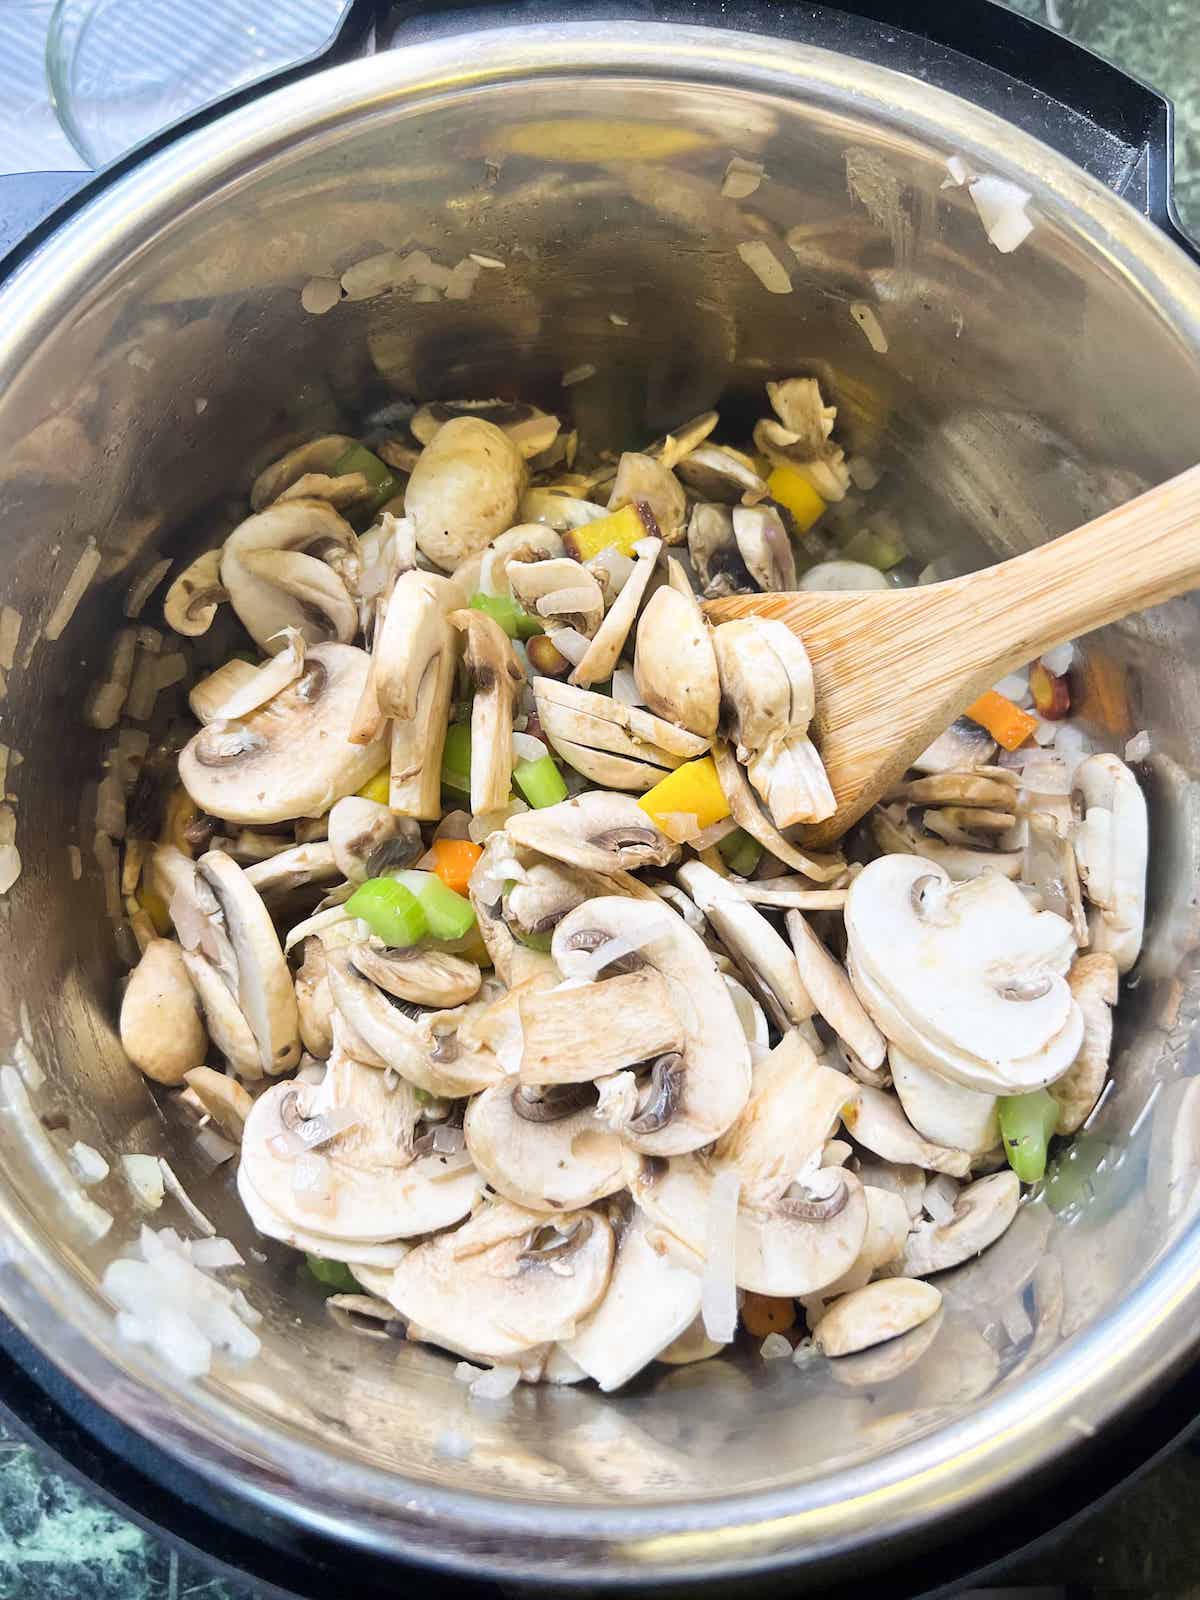 Sliced mushrooms and sauteed aromatics in an instant pot with a wooden spoon